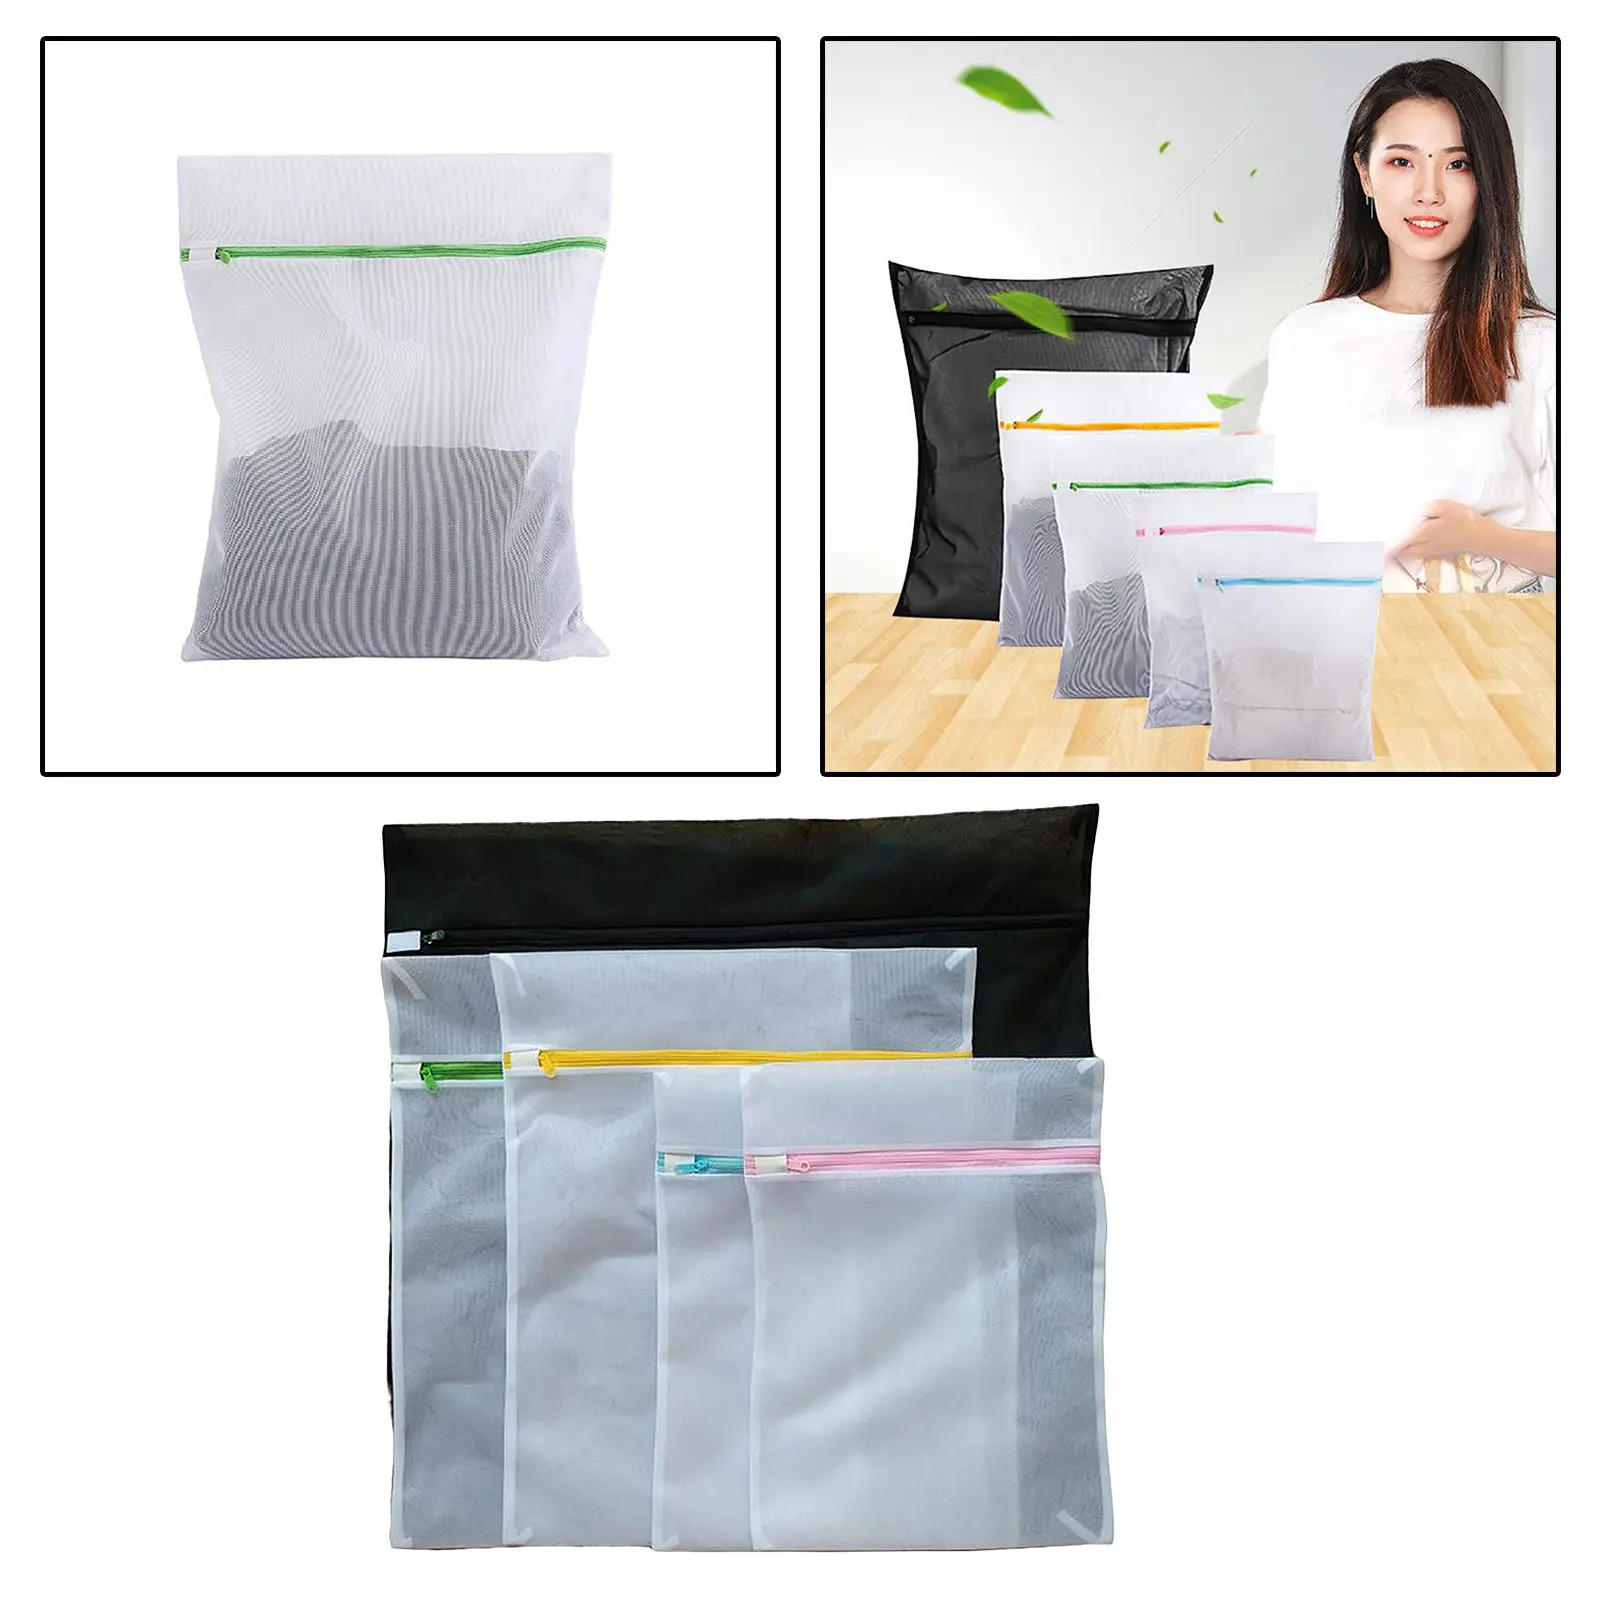 5Pieces Mesh Laundry Bags for Delicates Travel Storage Organize Bag, Clothing Washing Bags for Travel Outdoor